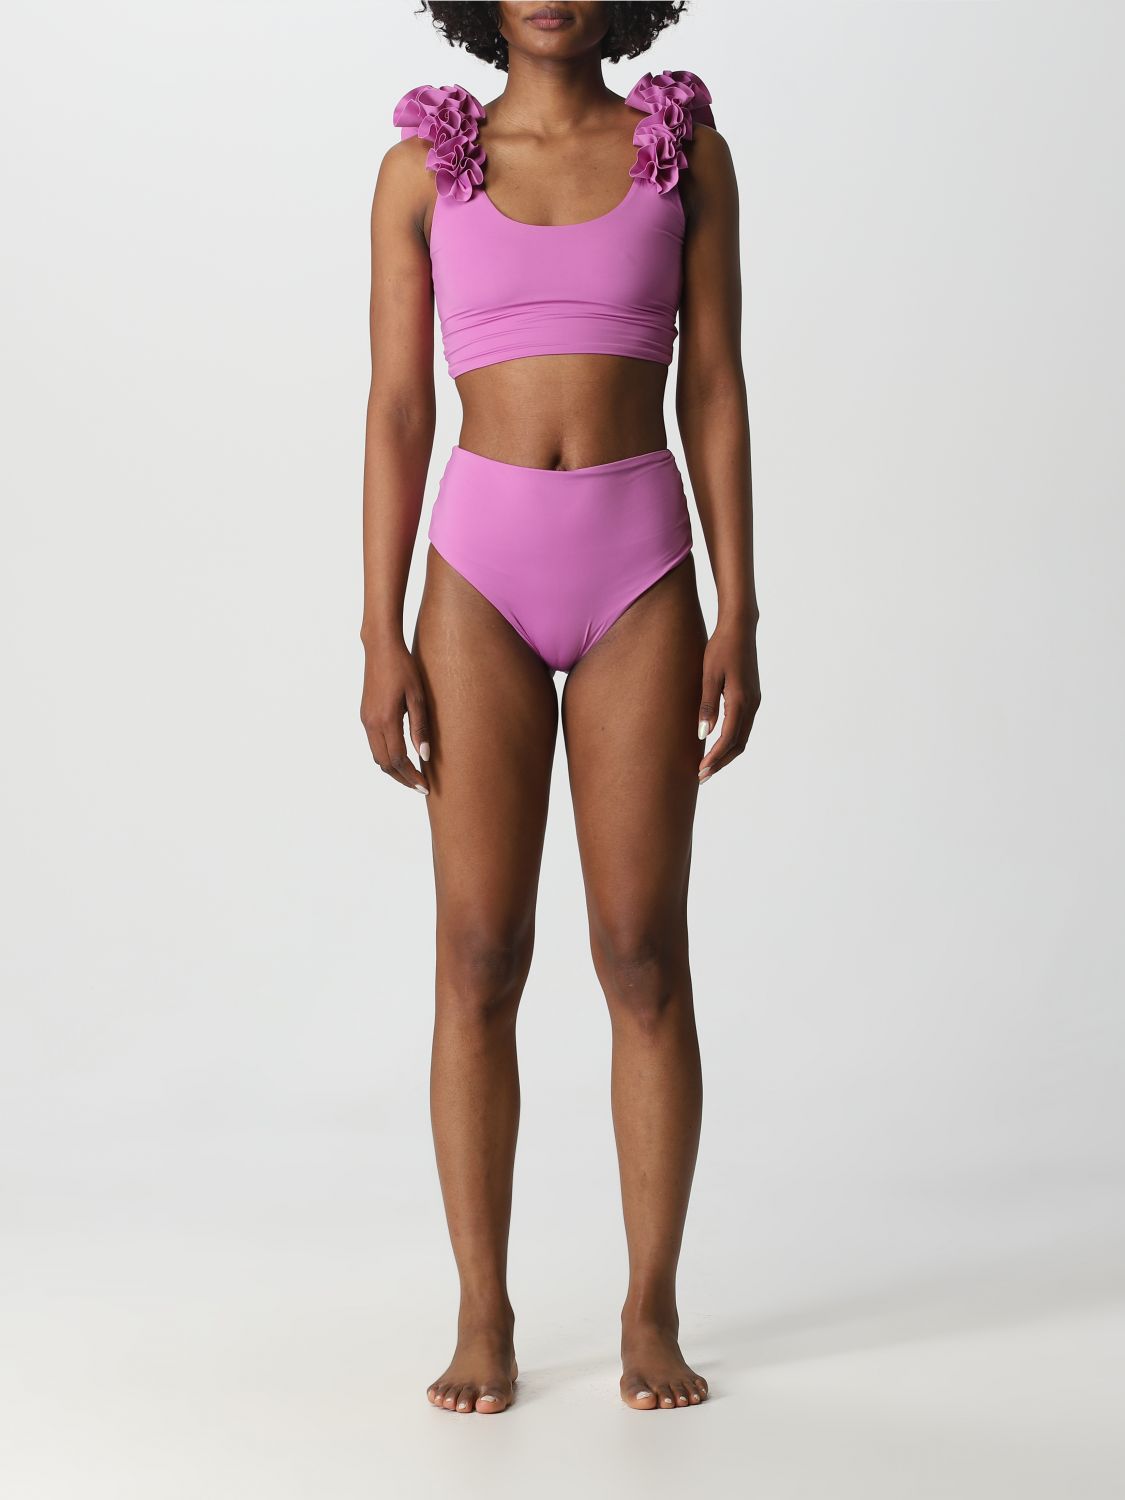 Maygel Coronel Swimsuit MAYGEL CORONEL Woman colour Violet